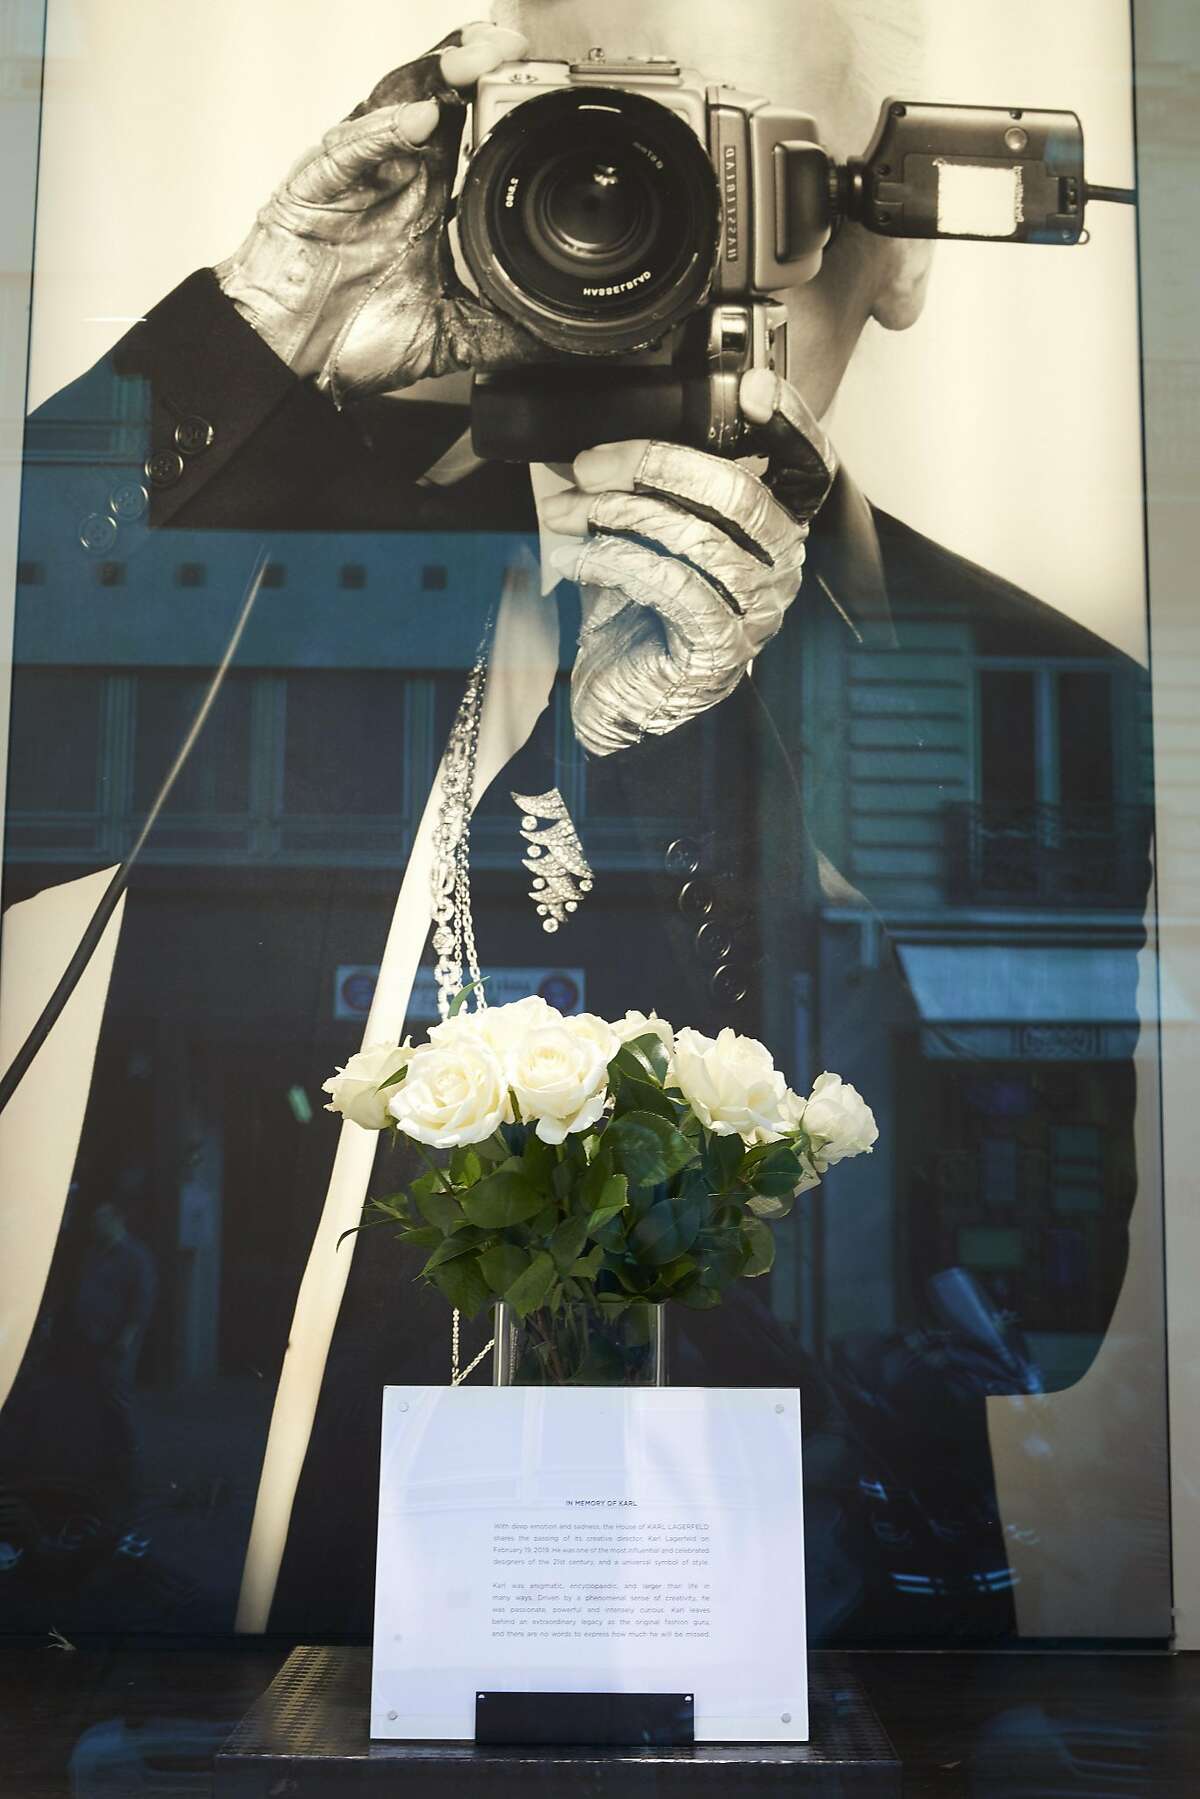 PARIS, FRANCE - FEBRUARY 20: A tribute to the designer Karl Lagerfeld in the window of his boutique near the Champs Elysees on February 20, 2019 in Paris, France. Celebrated fashion designer Karl Lagerfeld died in Paris yesterday, aged 85. Most recently he was Creative Director at both the fashion houses of Chanel and Fendi and during his career he also worked with Pierre Balmain and Chloe. Several designers have paid tribute to him including Donatella Versace and Victoria Beckham. Virginie Viard, who was with Lagerfeld since she was an intern, has been appointed by Chanel as his successor. (Photo by Kiran Ridley/Getty Images)